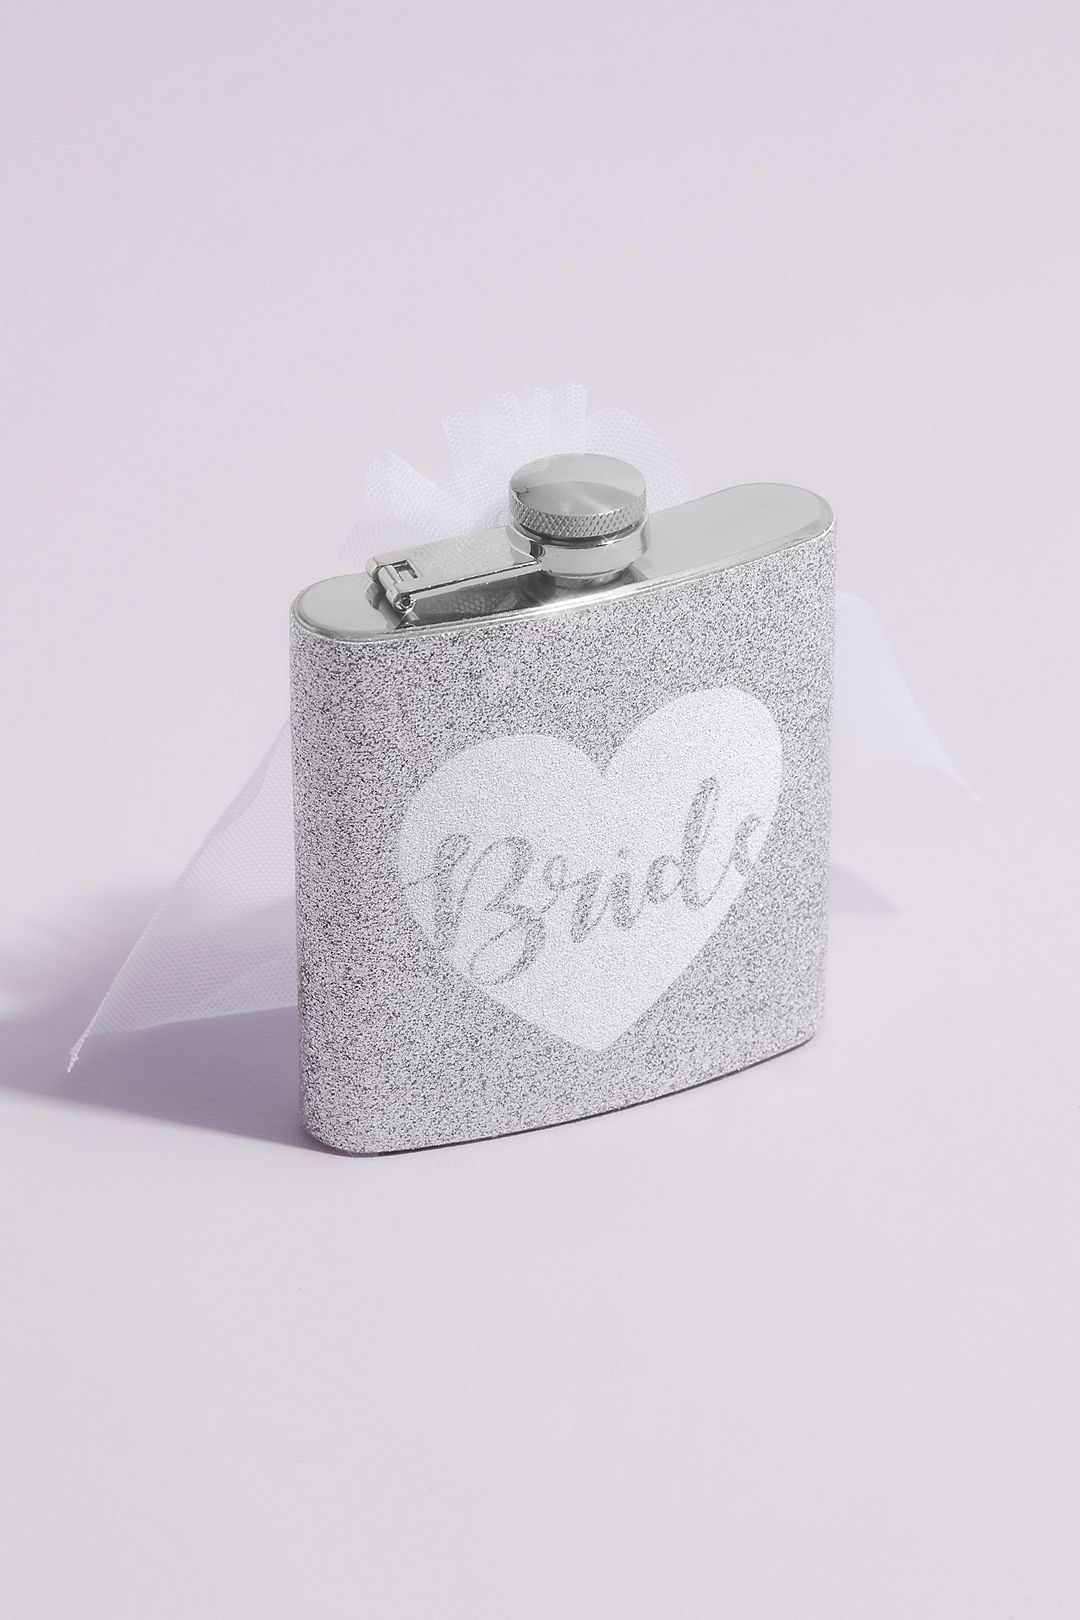 Glitter Bride Flask with Veil Image